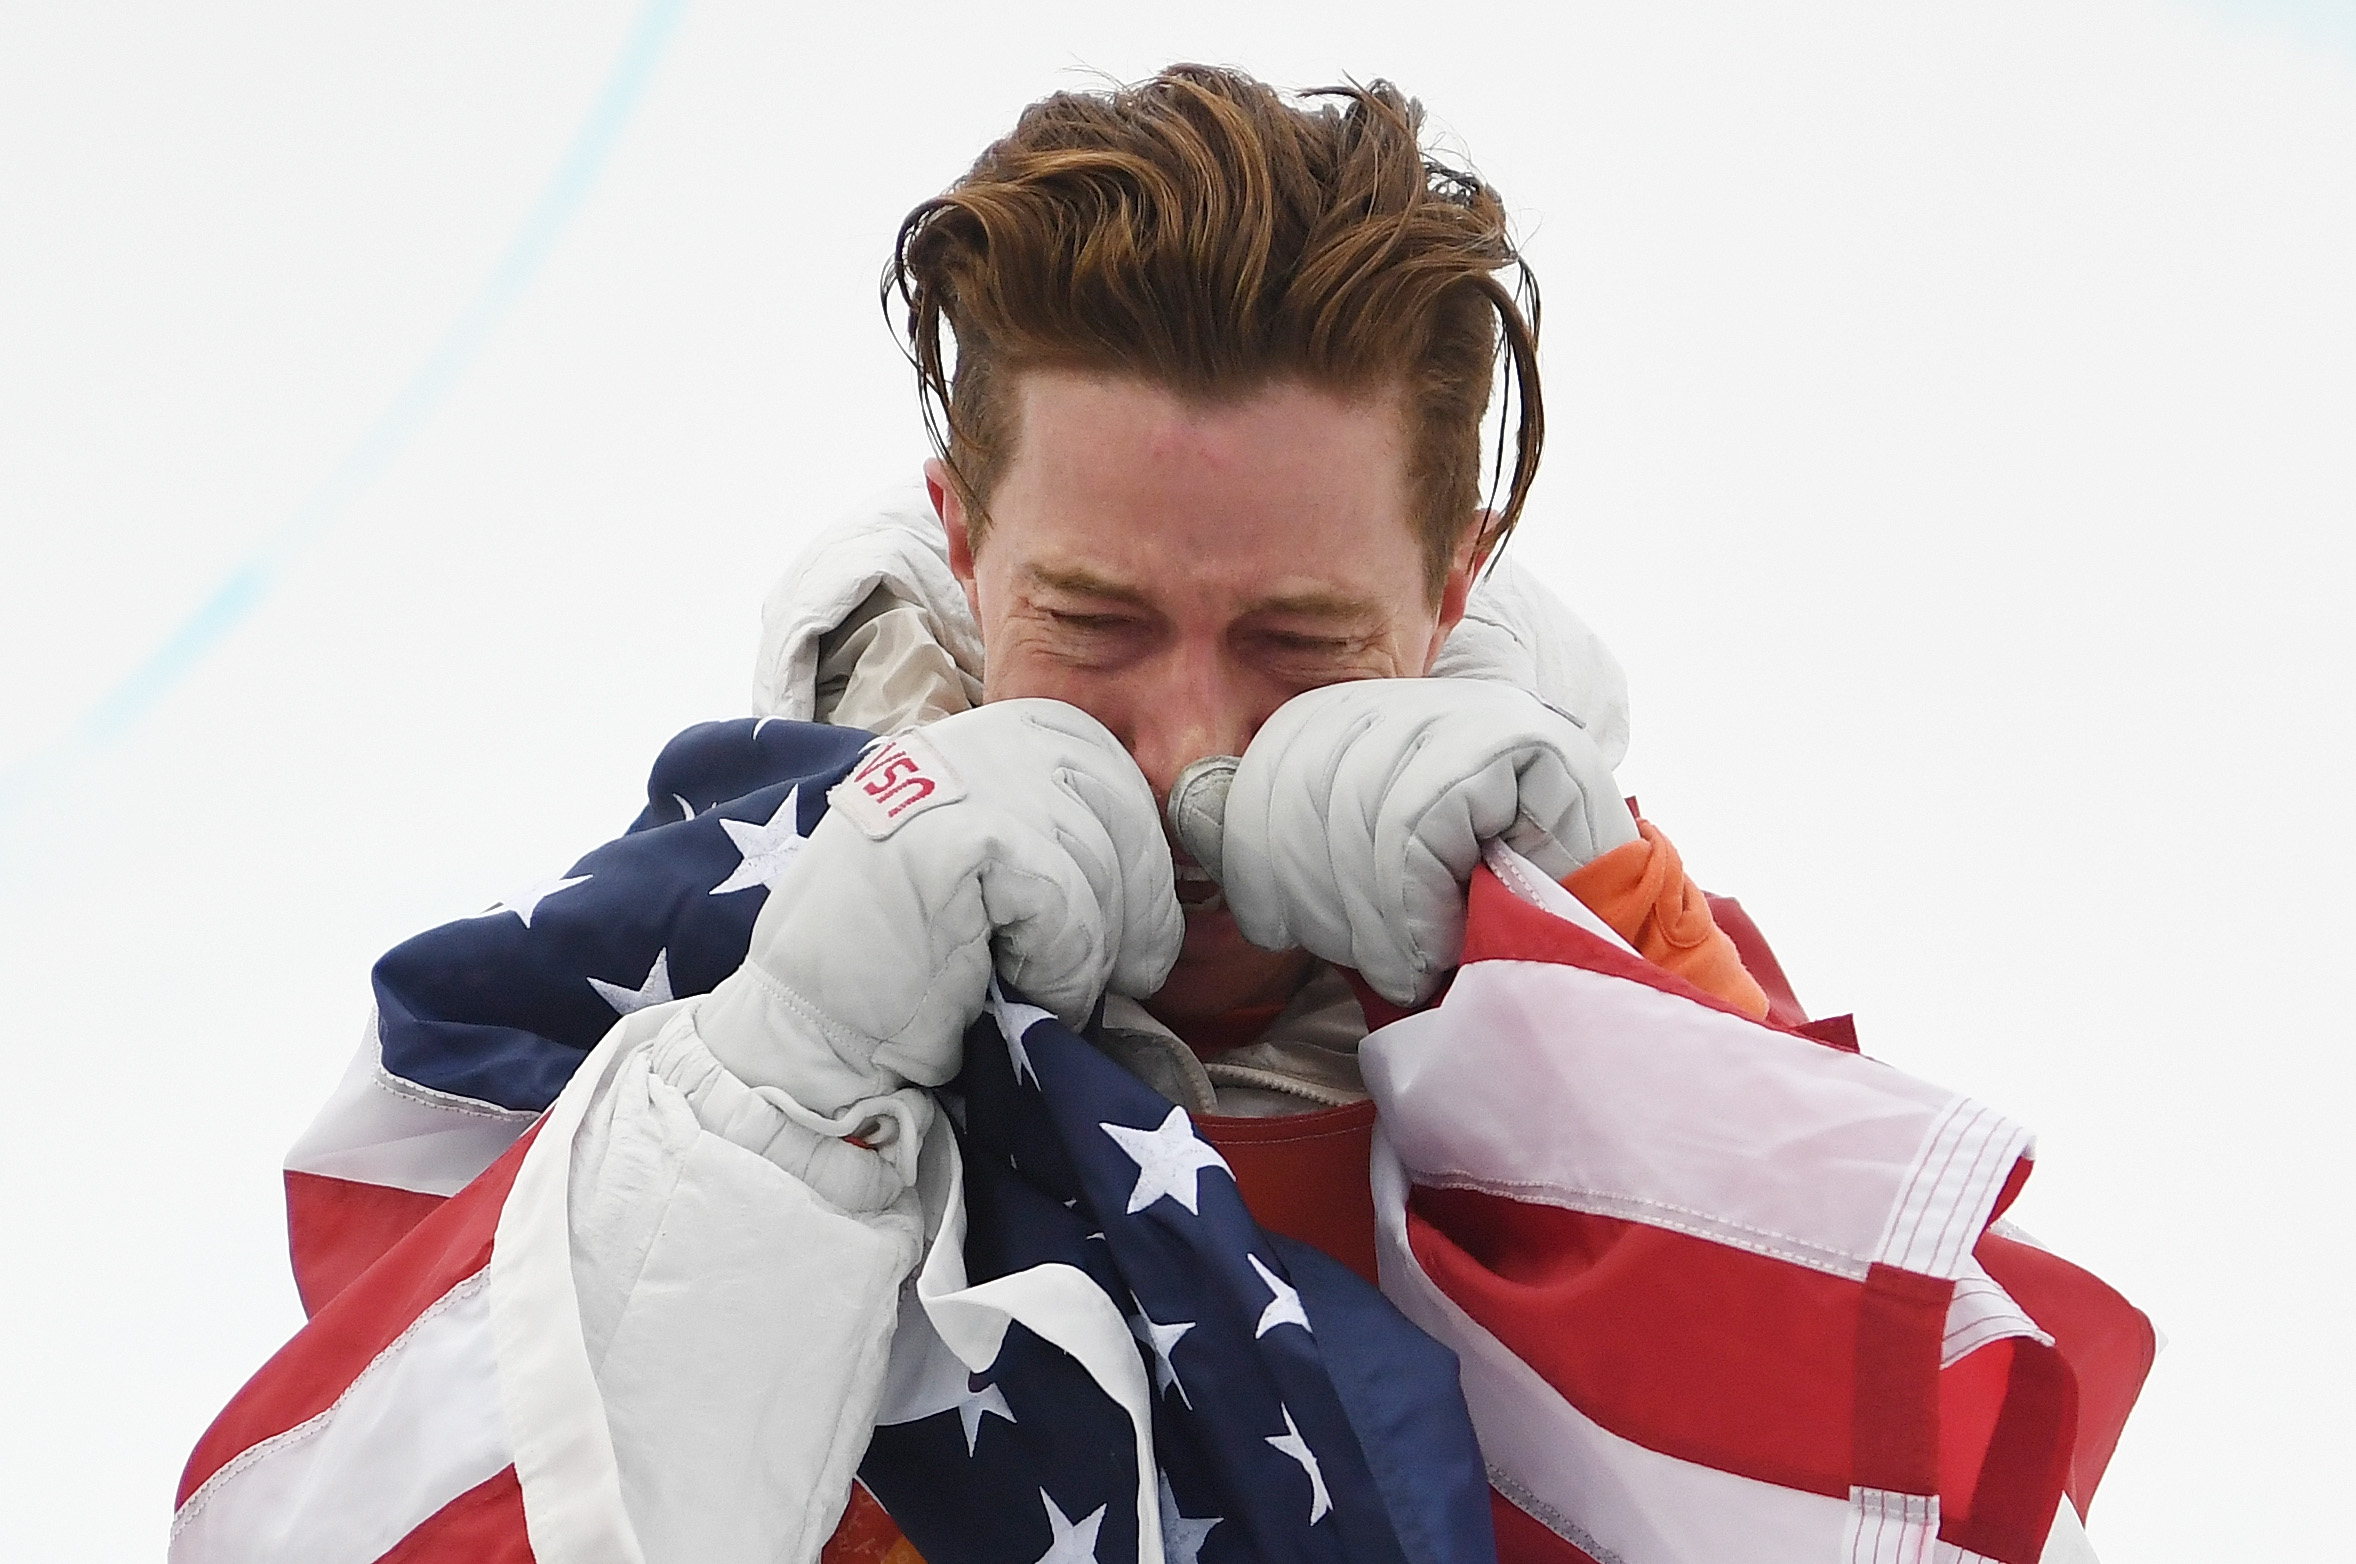 Vancouver 2010: Shaun White Gets 'Twisted' on Winning Run